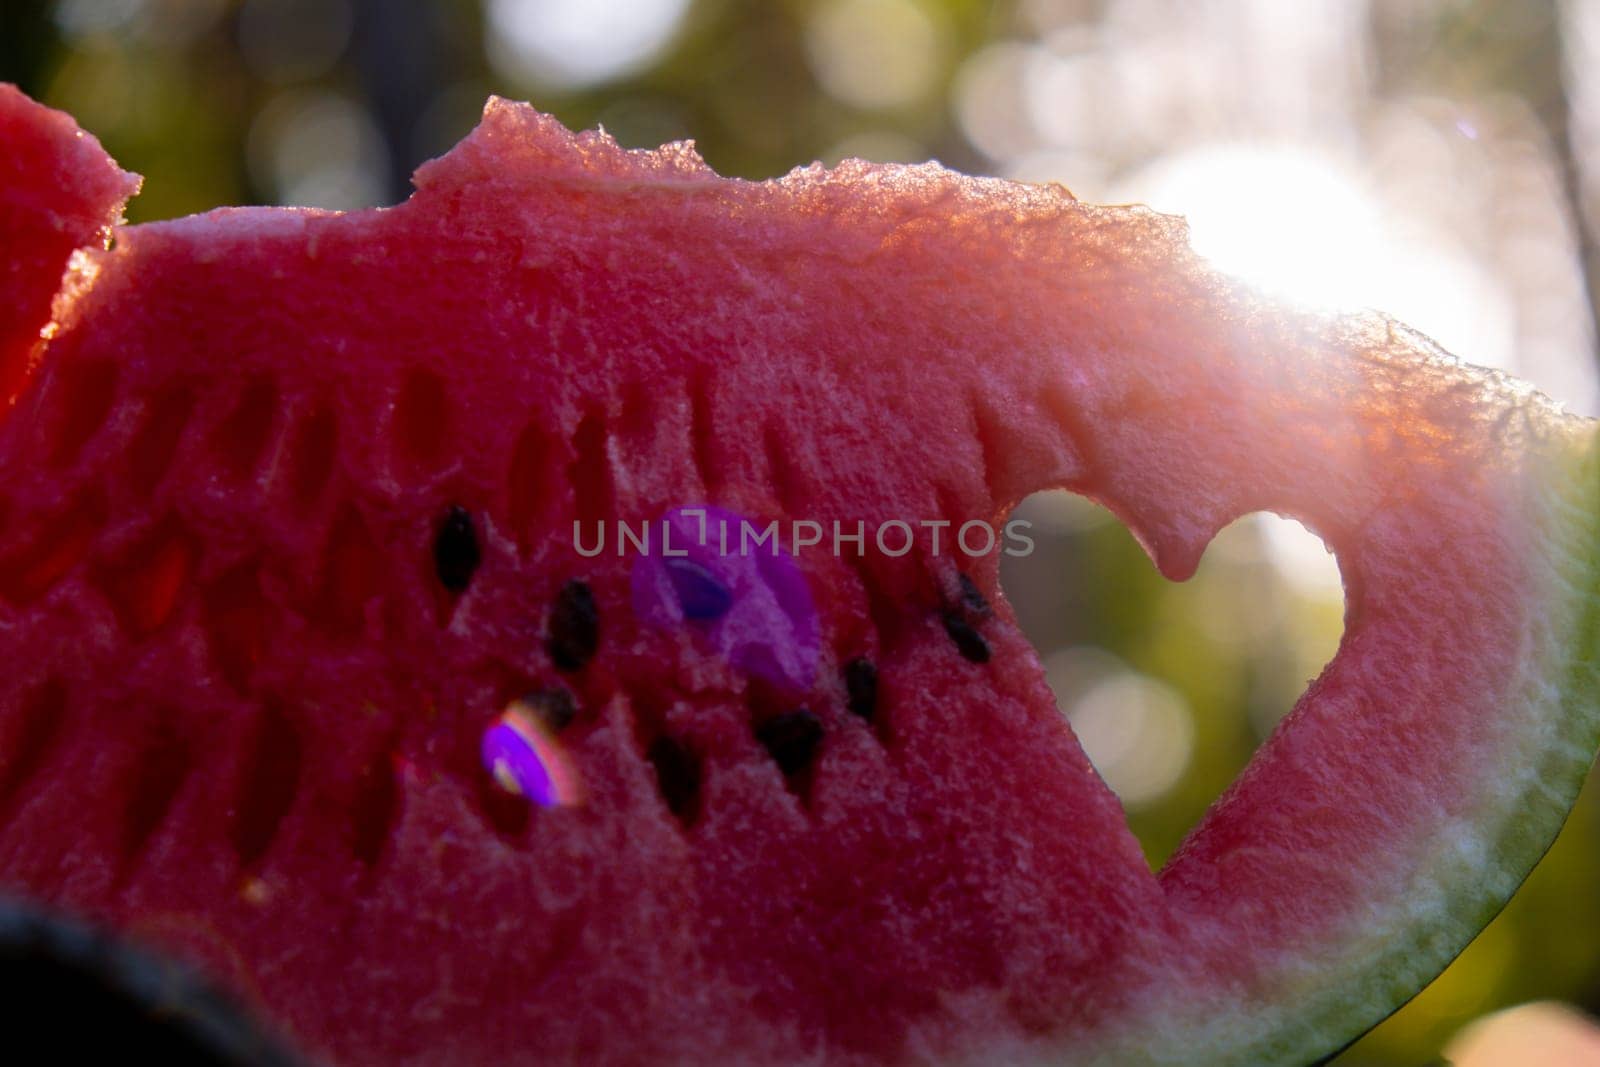 Summer seasonal food. Juicy red watermelon slice cut in heart shape outdoors summertime holidays sunbeams. Concept of enjoying the moment in fresh air. Sustainable calm lifestyle pastoral life cottagecore escapism